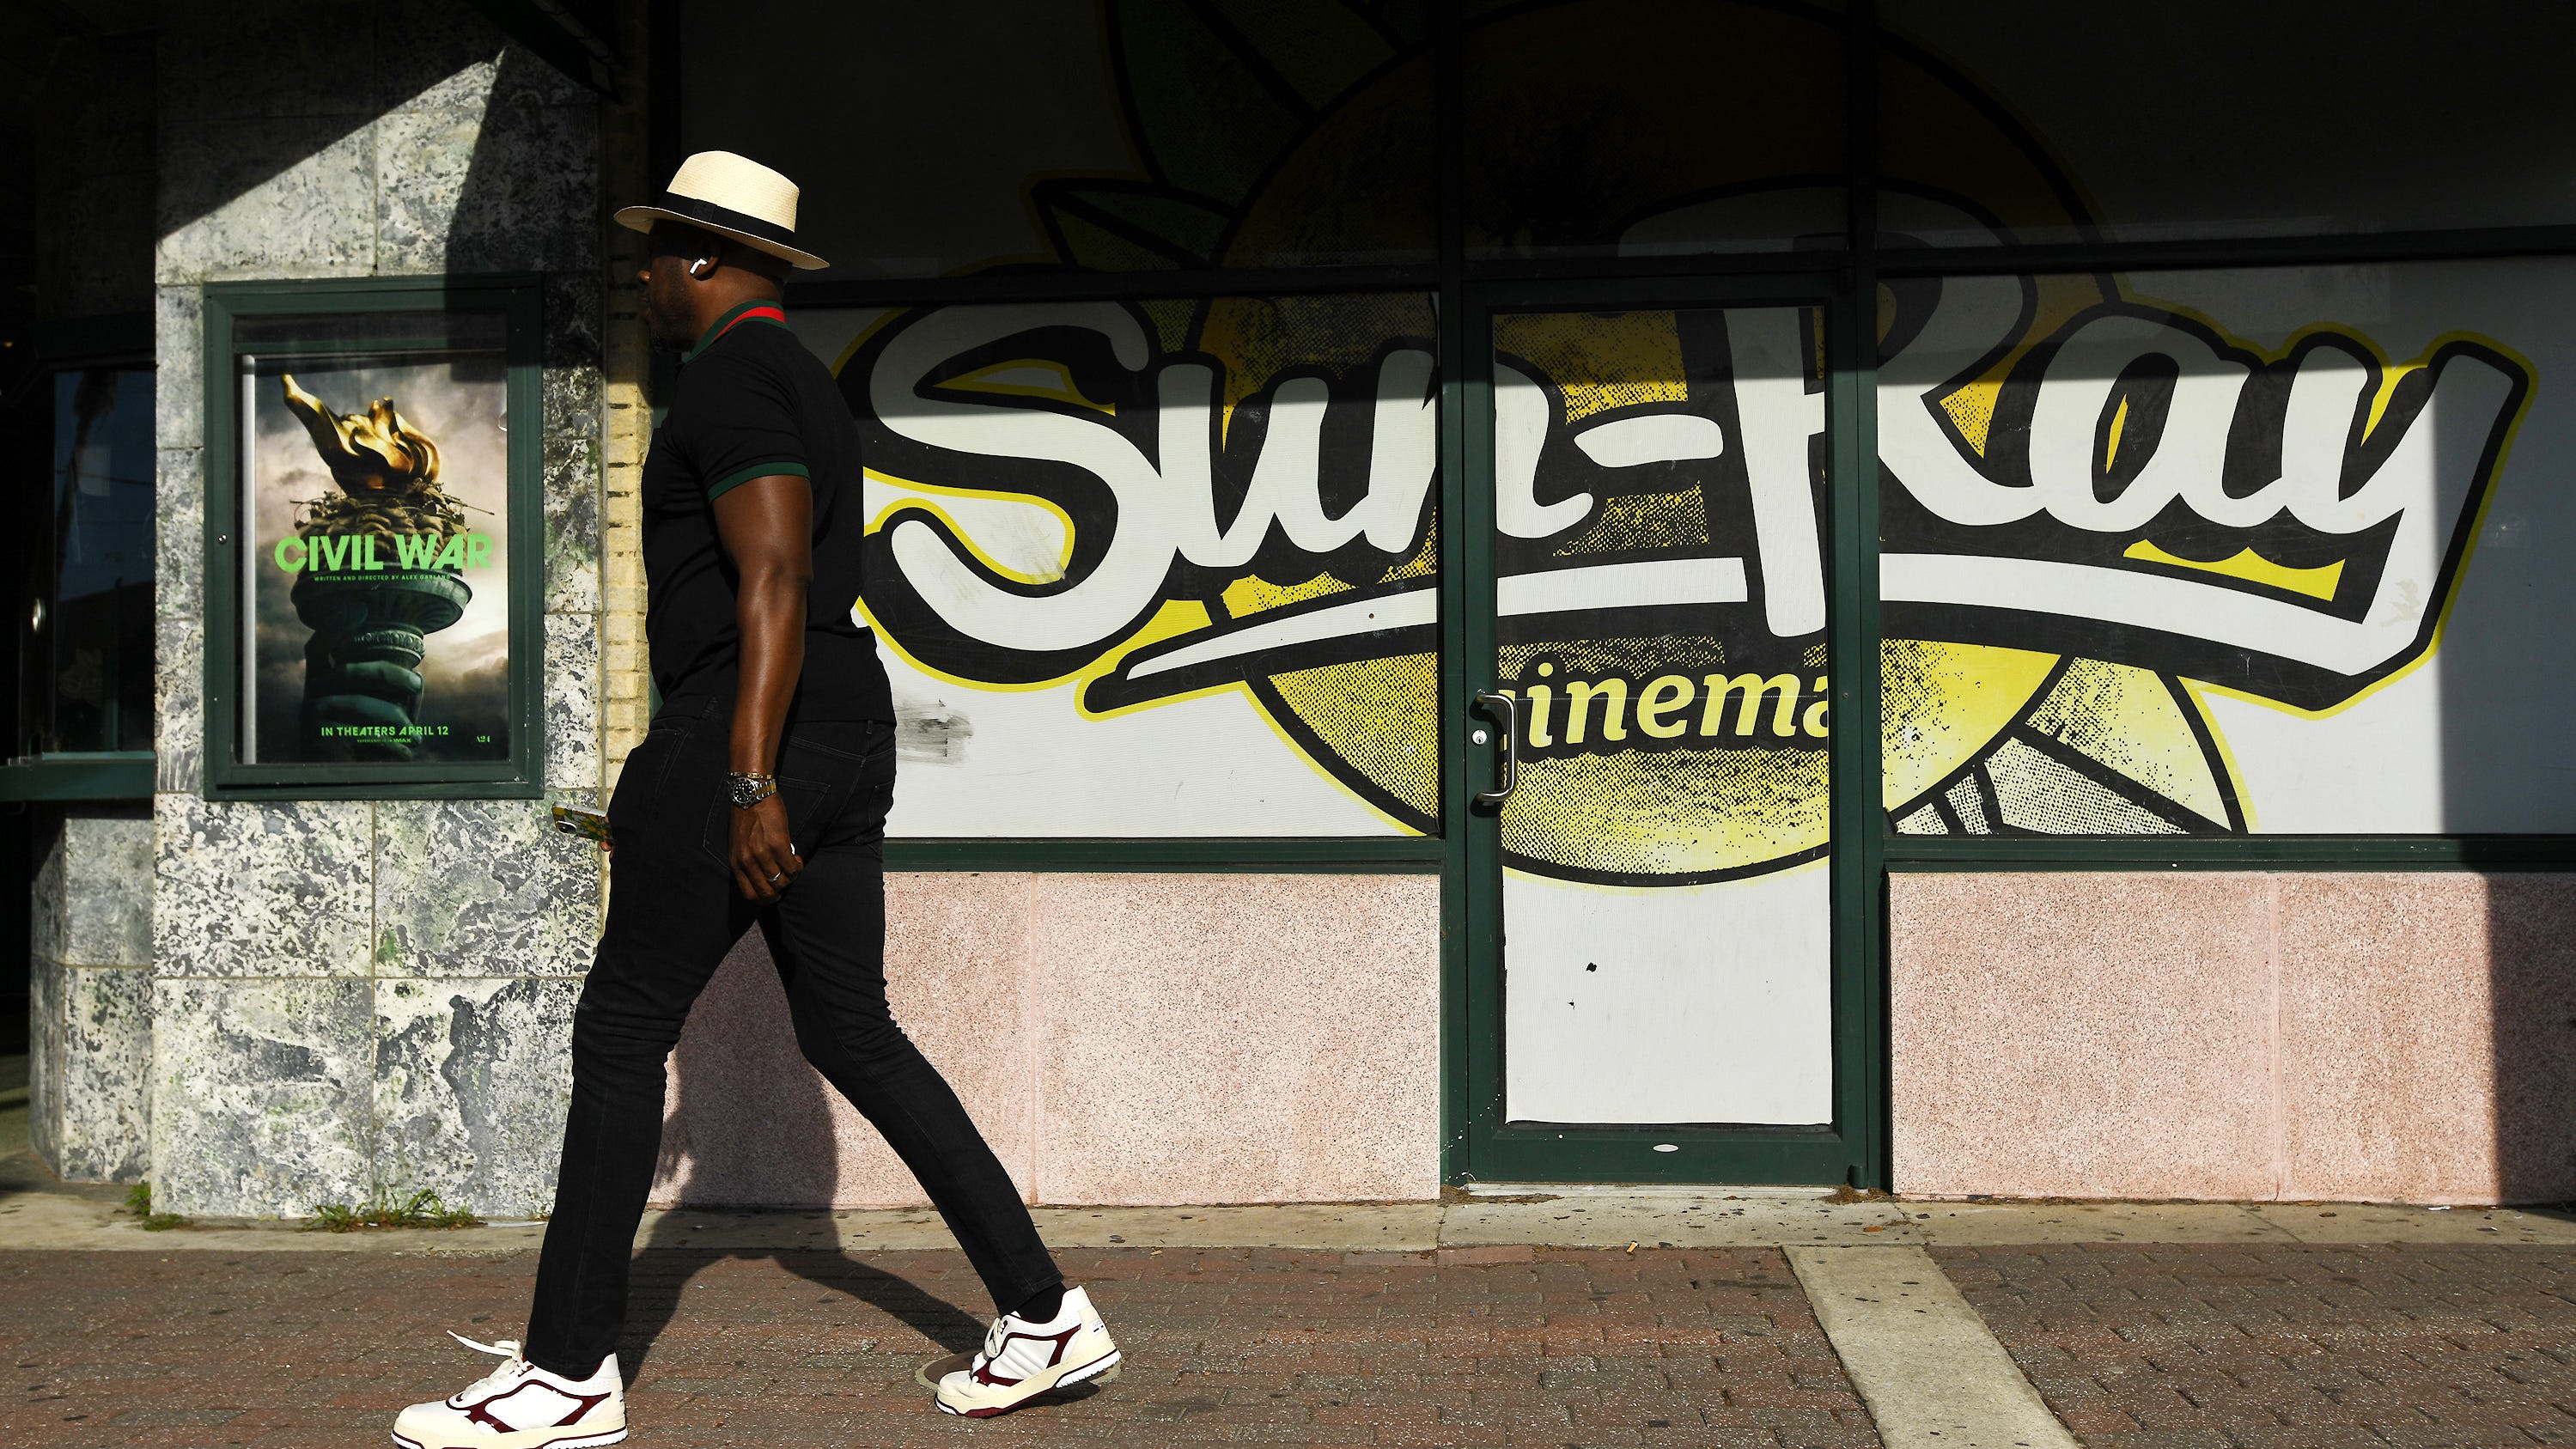 Sun-Ray Cinema to close, Five Points Theater building sold. What does this mean?